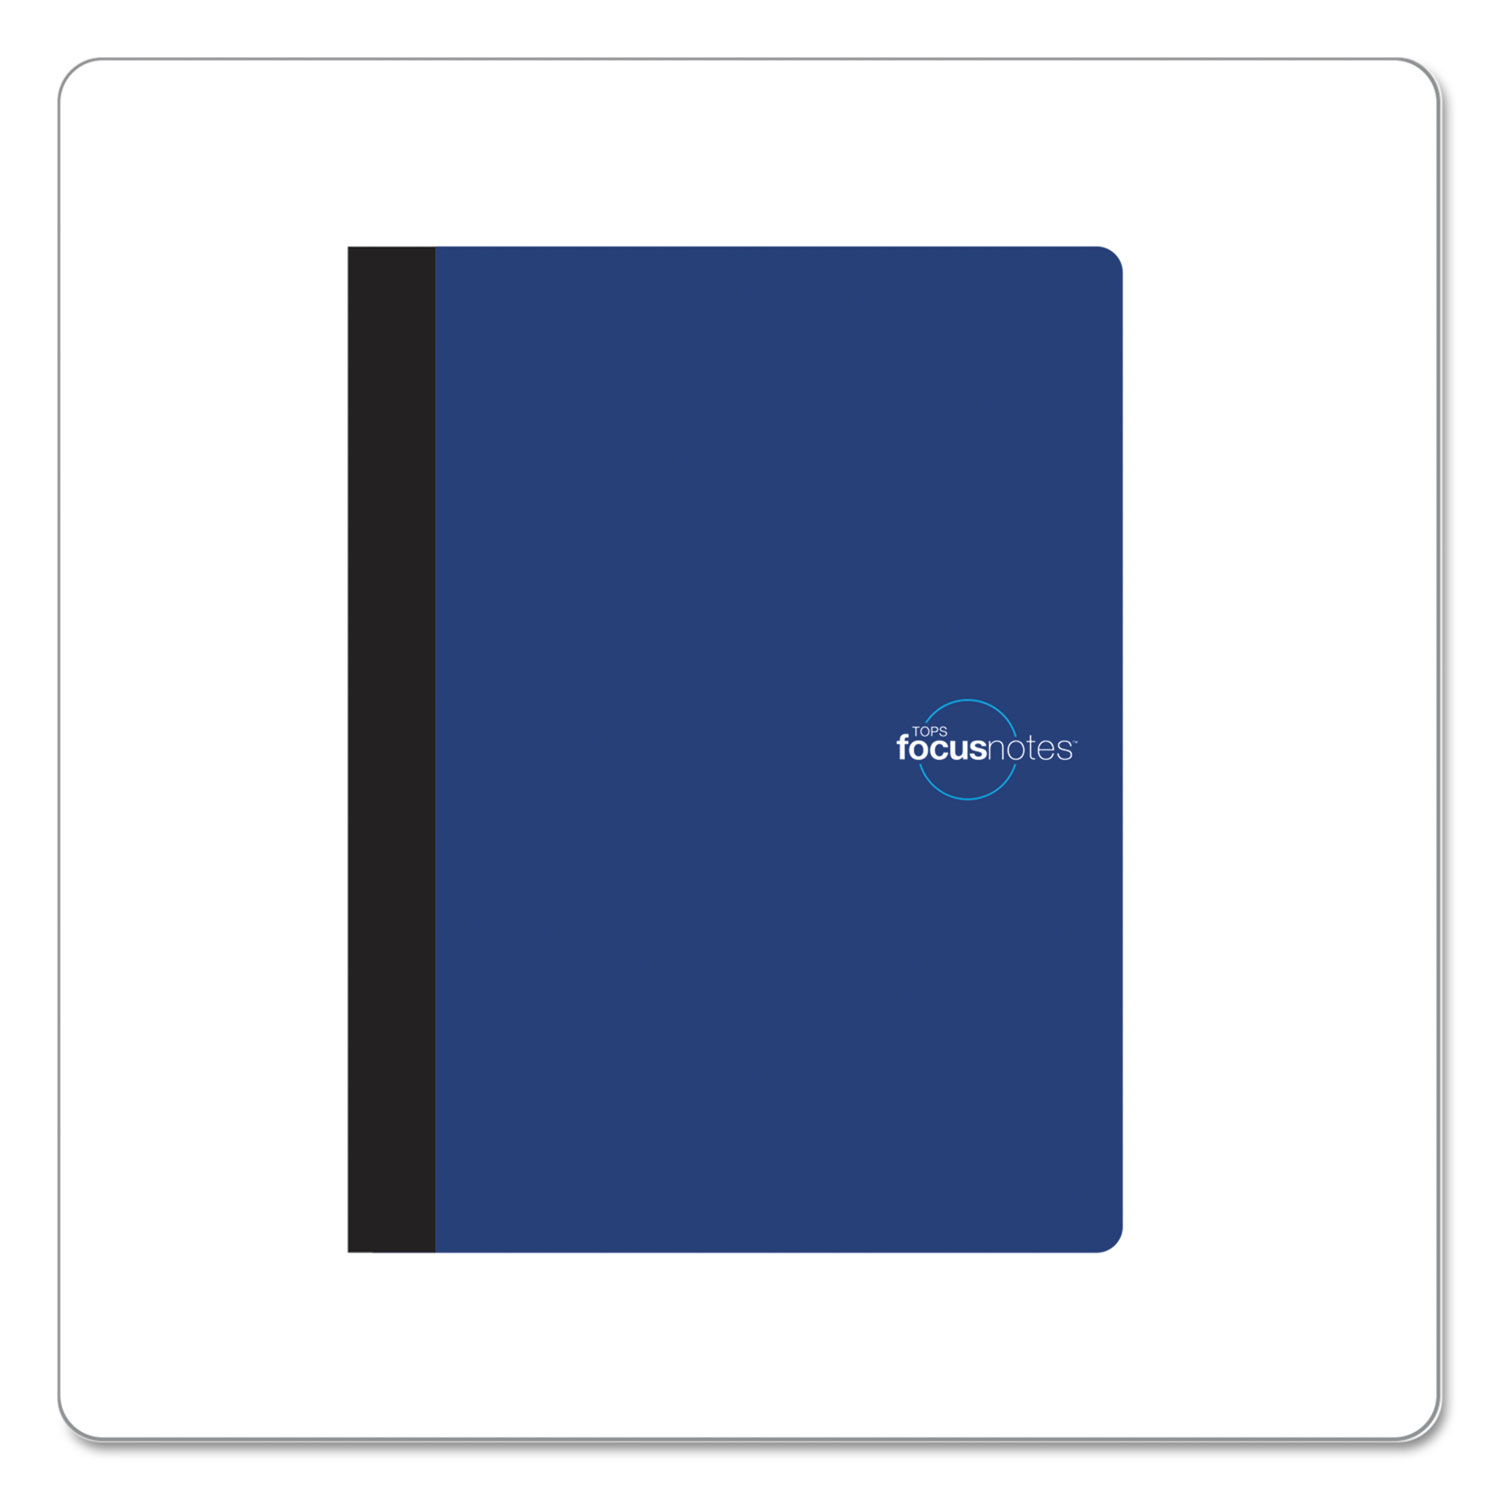  TOPS 90224 FocusNotes Composition Book, Lecture Notes, Blue, 9.75 x 7.5, 80 Sheets (TOP90224) 